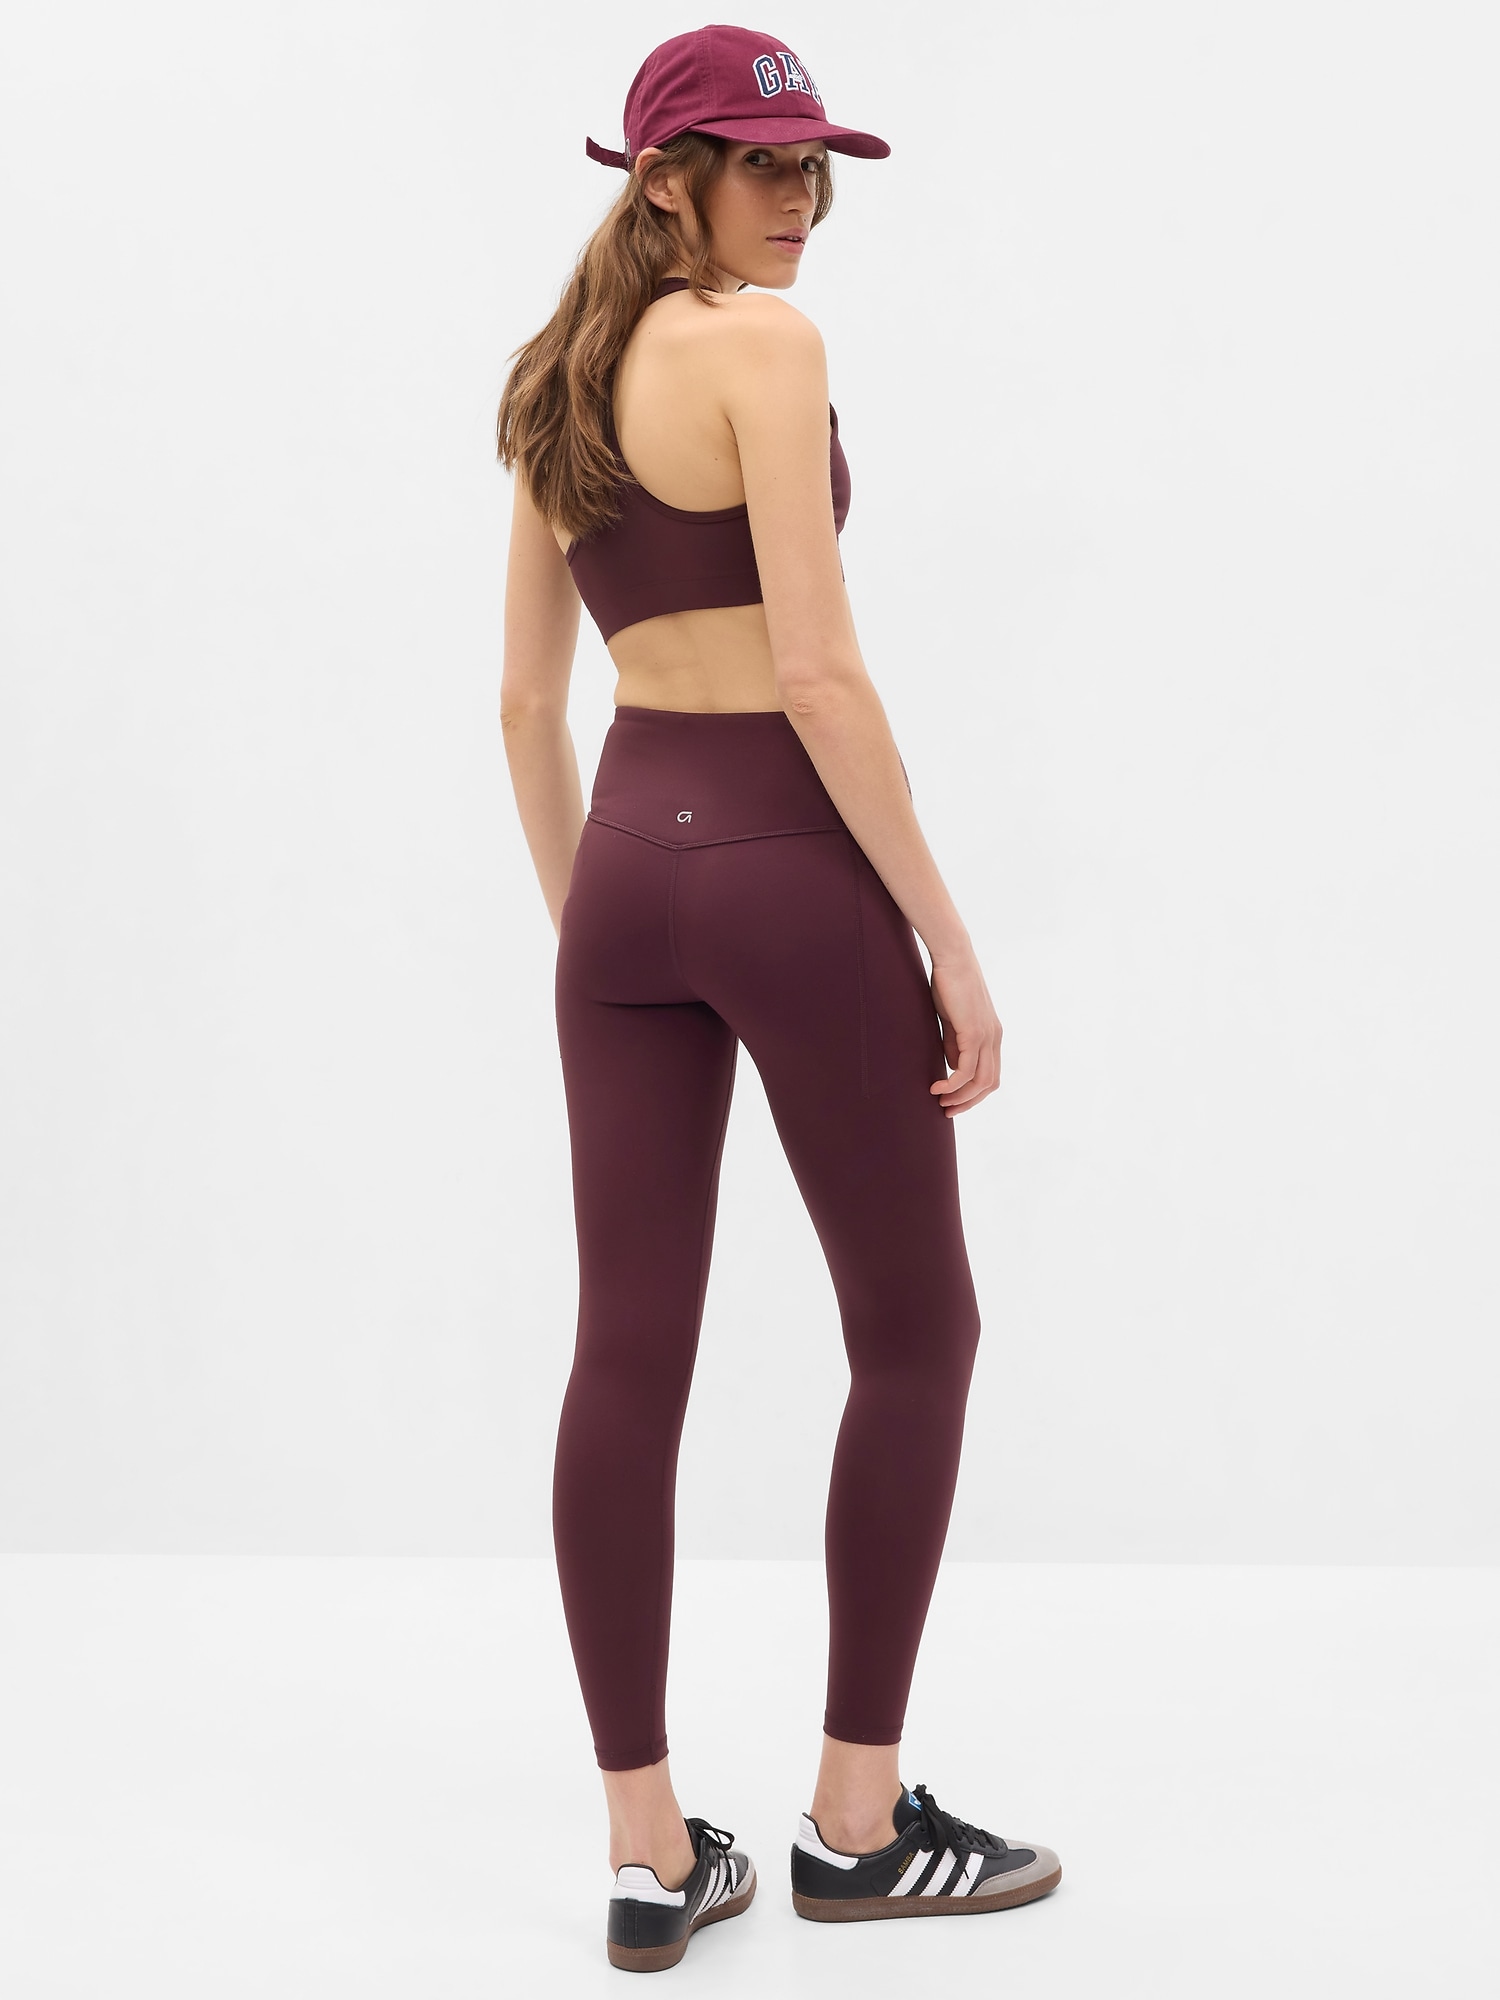 Gap Fit Ribbed Seamless Active Matching Set Try On and Review #gap #ga